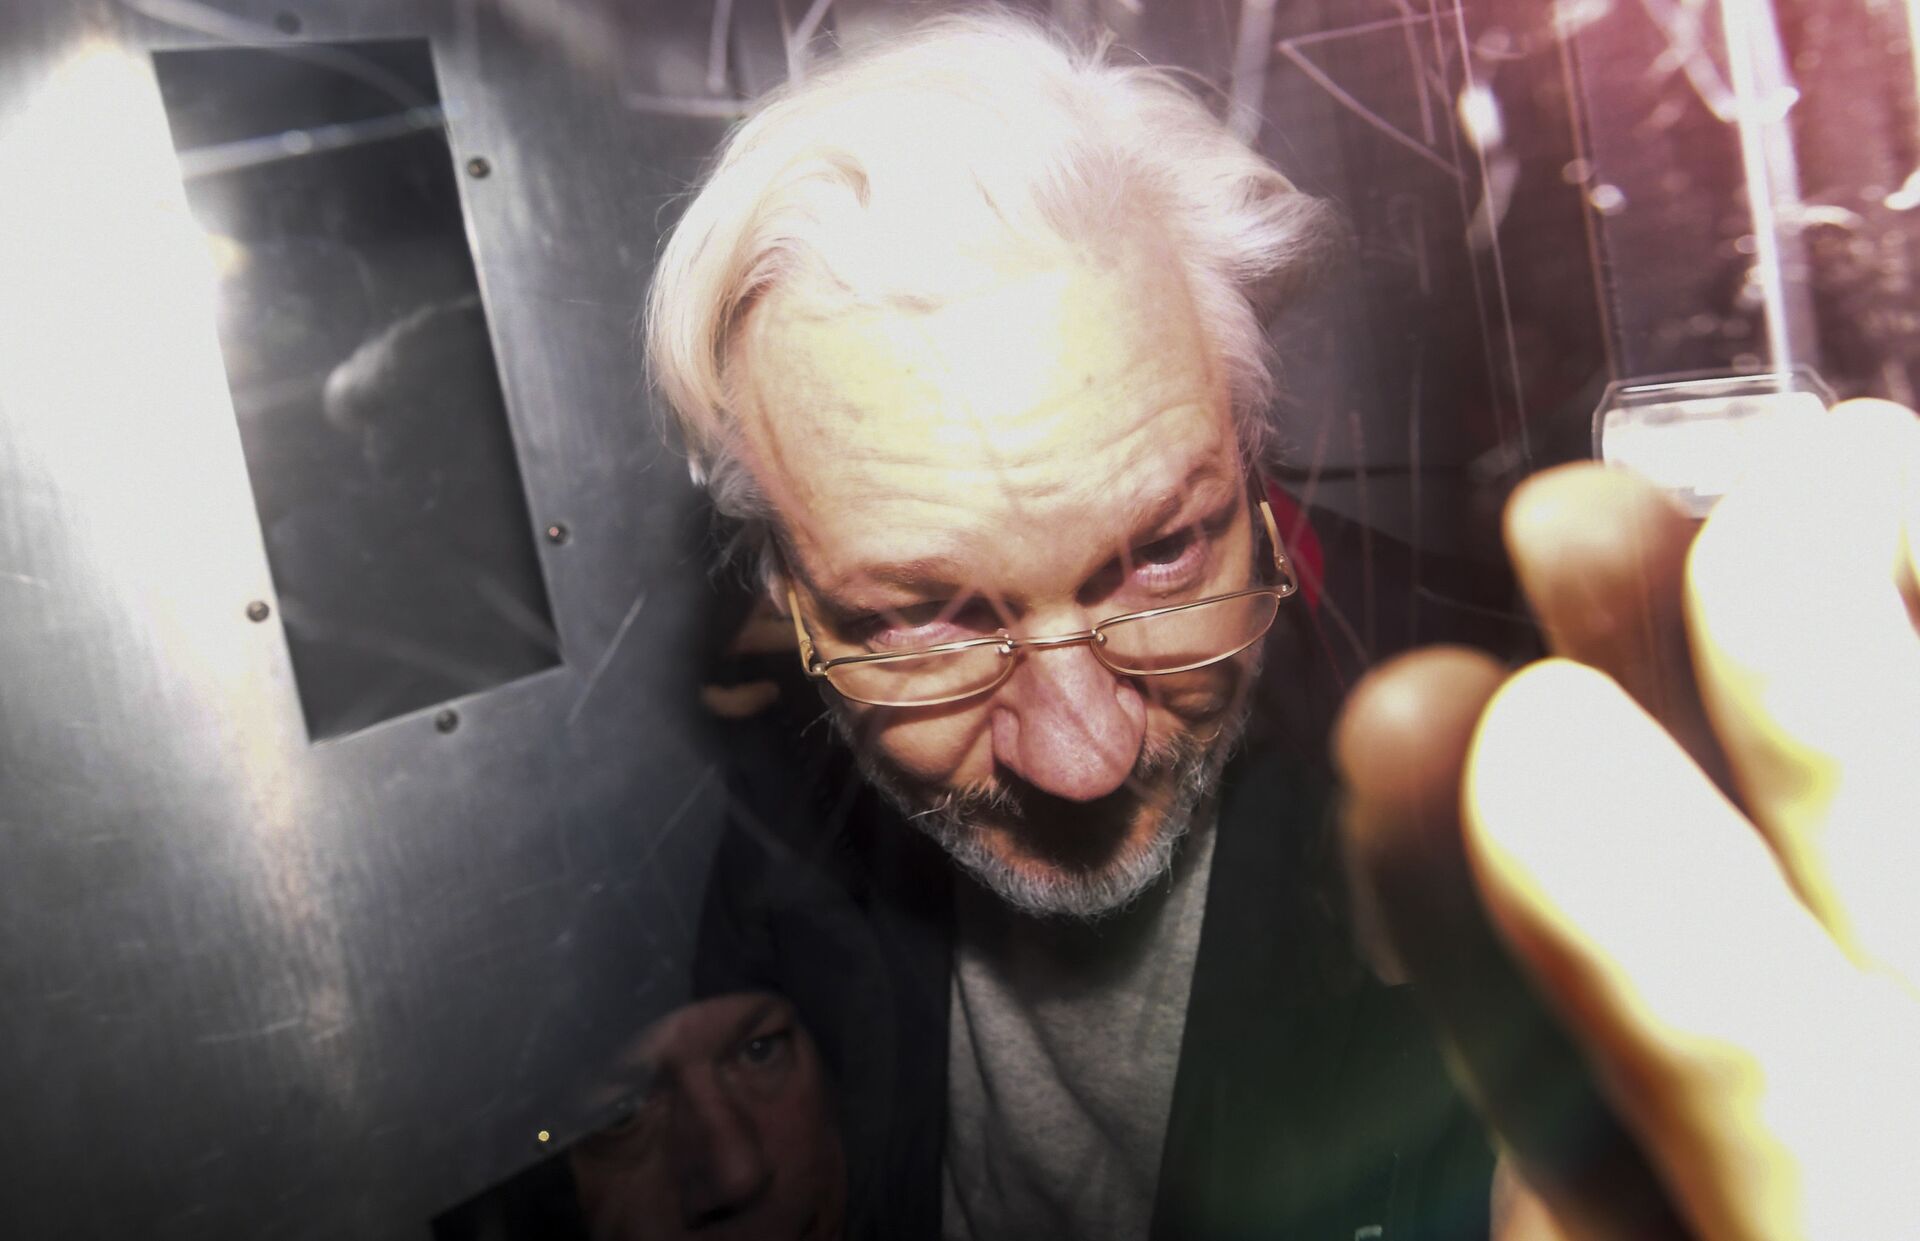 Wikileaks founder Julian Assange leaves in a prison van after appearing at Westminster Magistrates Court, for an administrative hearing in London, Monday, Jan. 13, 2020 - Sputnik International, 1920, 07.09.2021